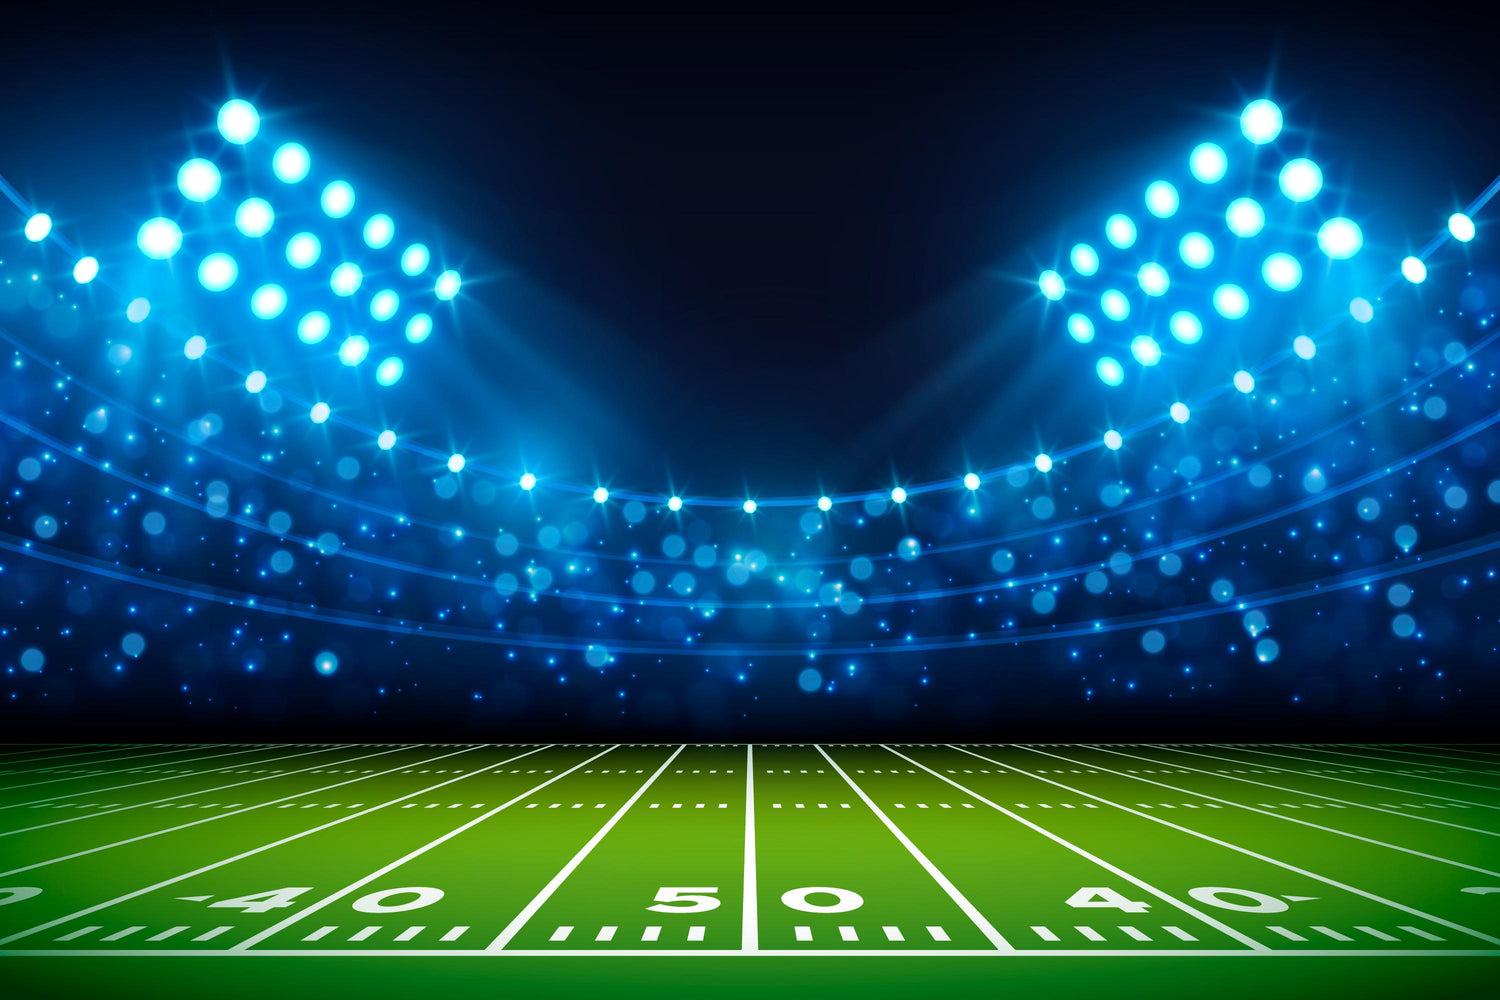 Image of a football field with numbers and well illuminated